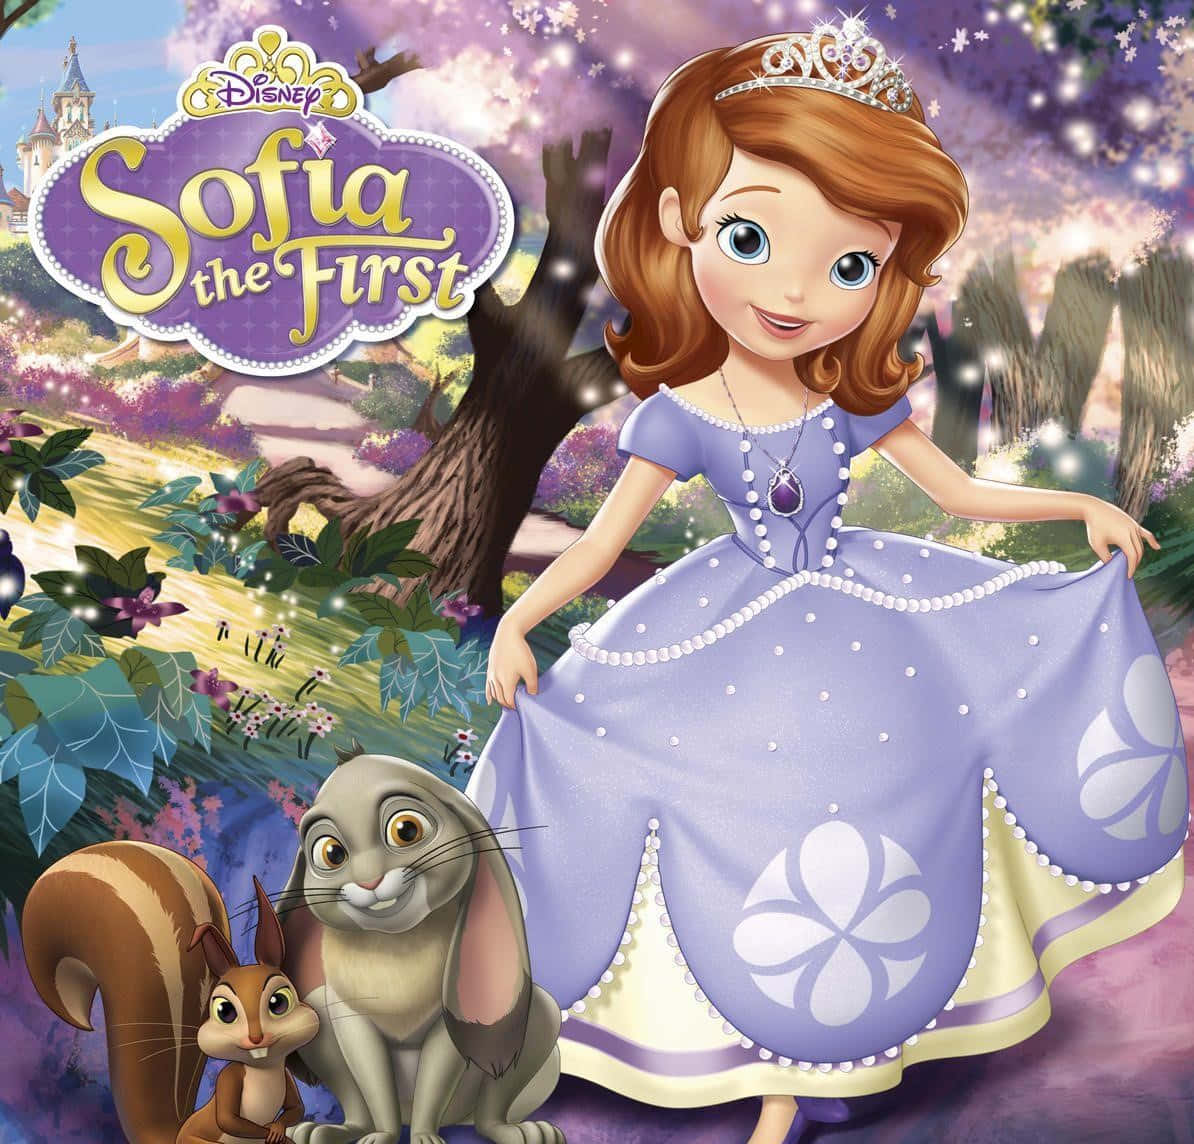 Caption: Charming Princess Sofia in her Magical Royal World Wallpaper